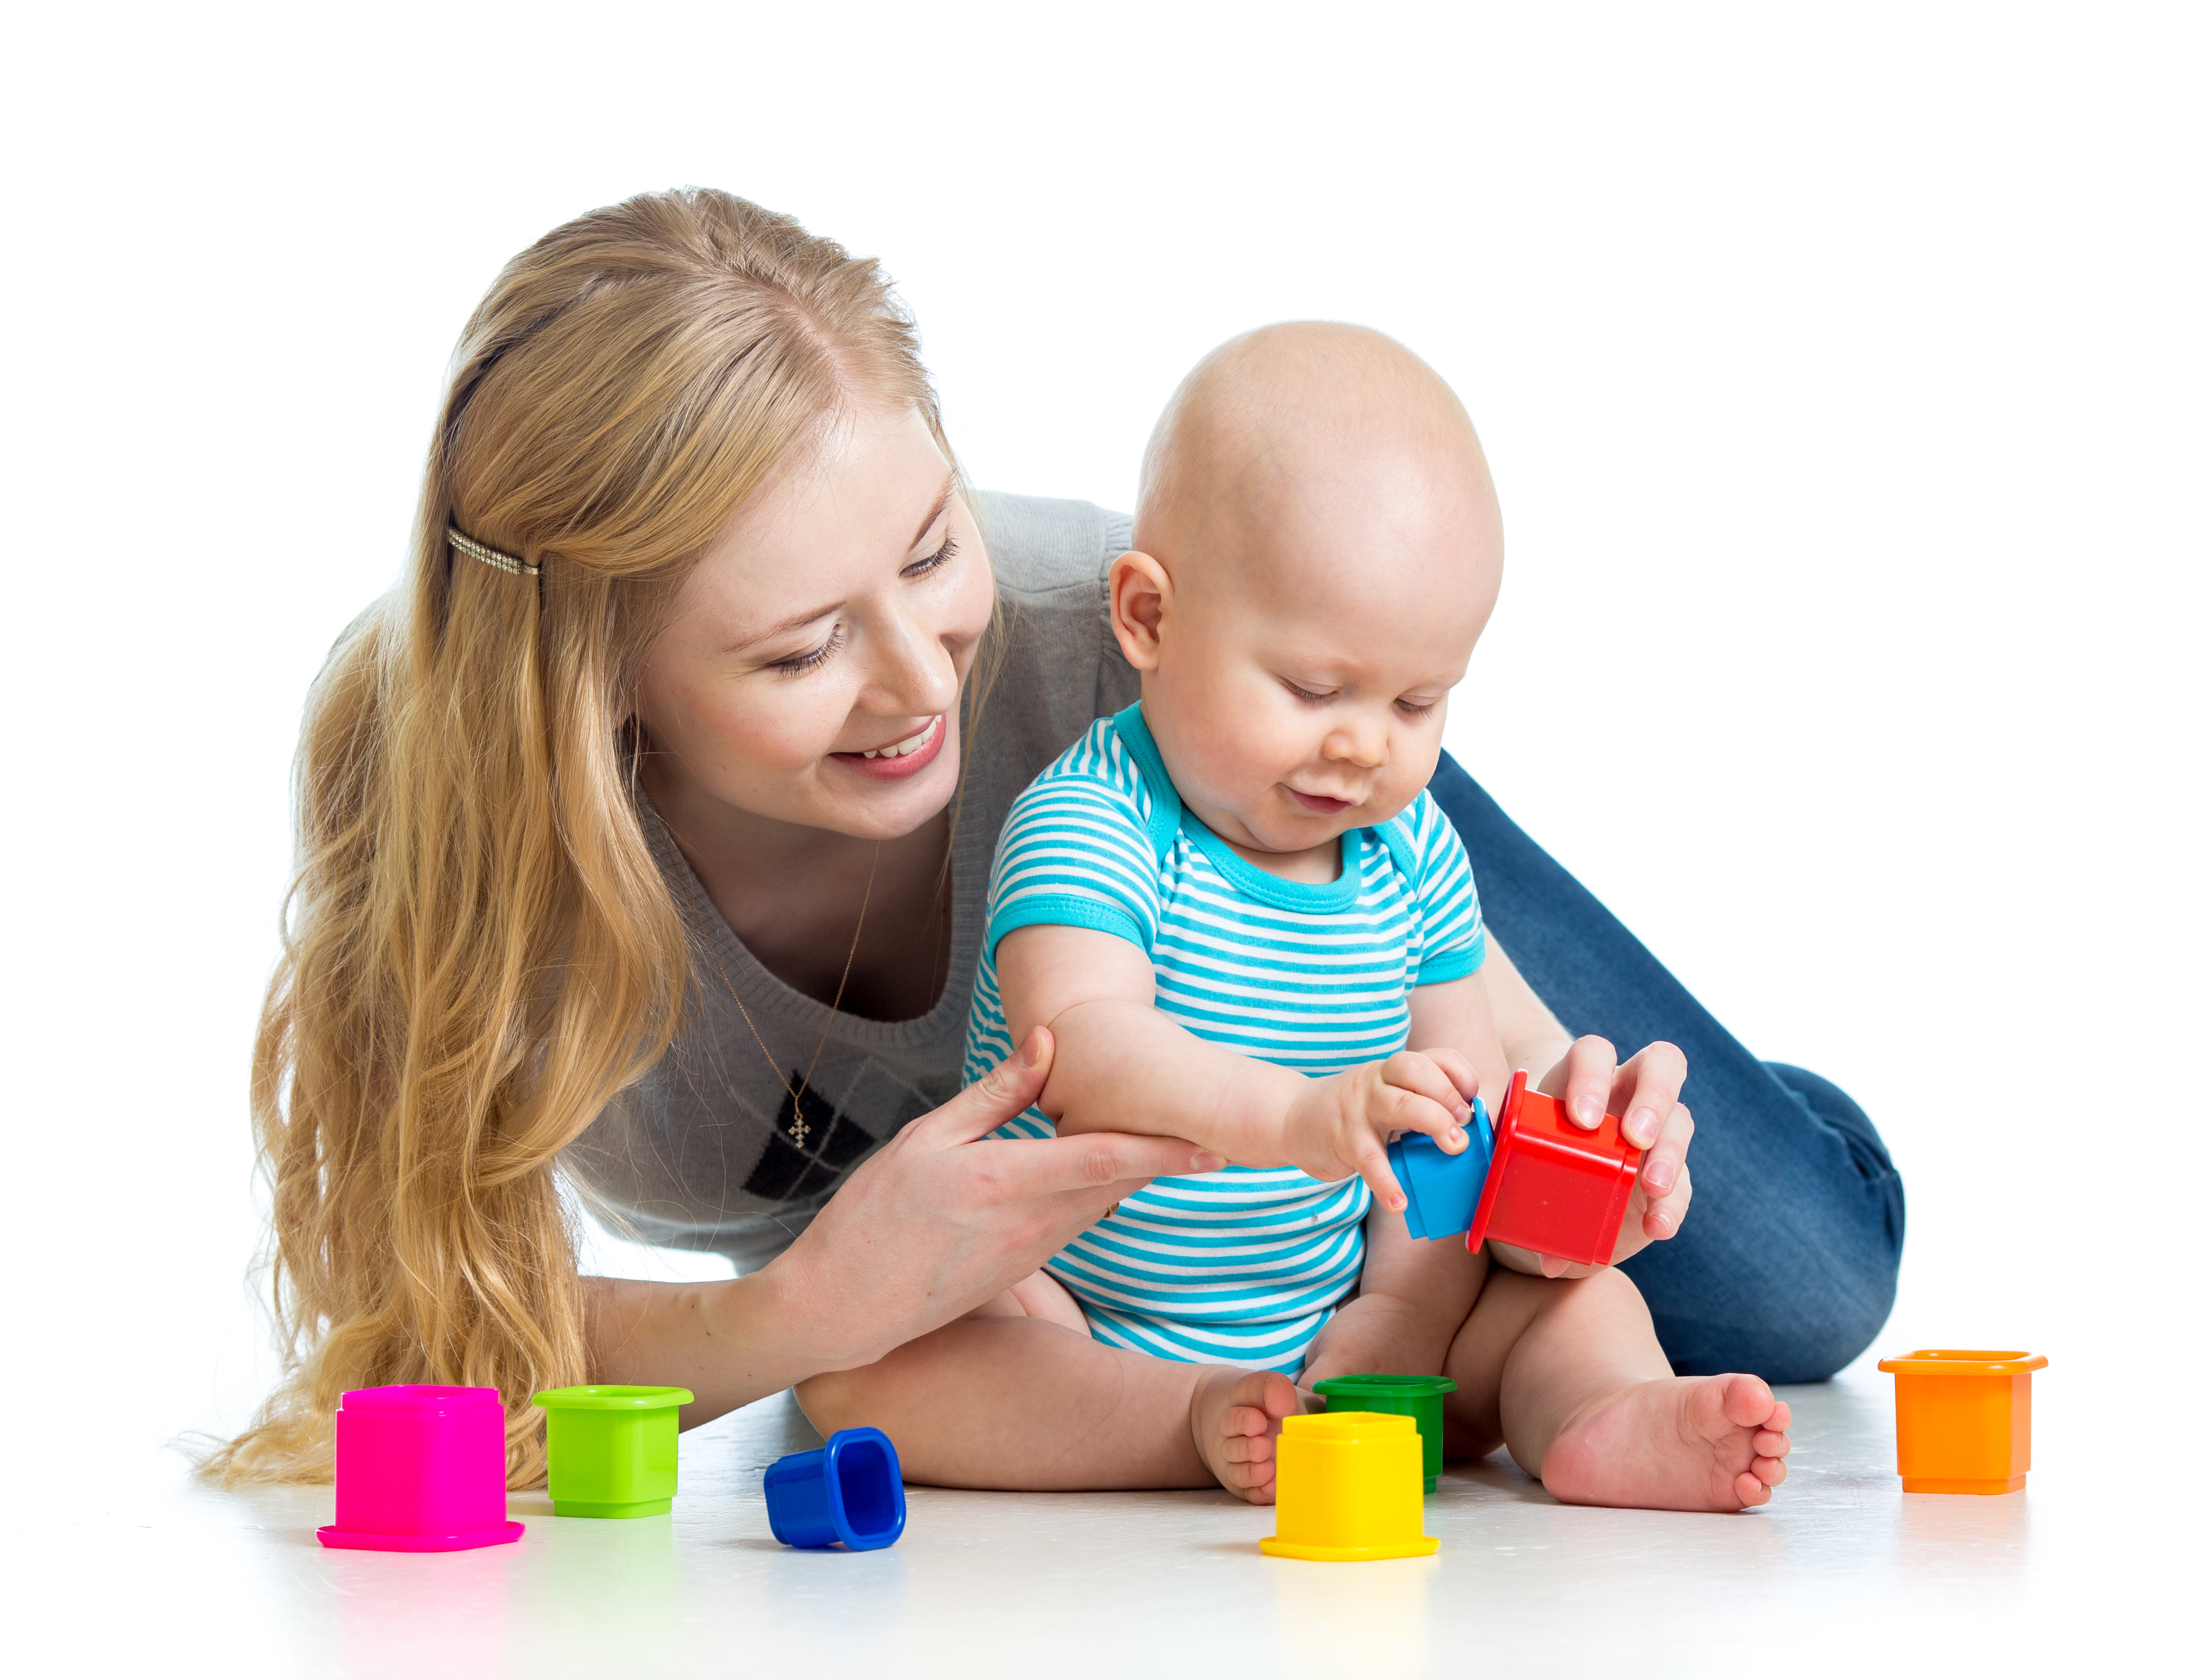 sf-baby-and-mom-playing-with-toys.jpg